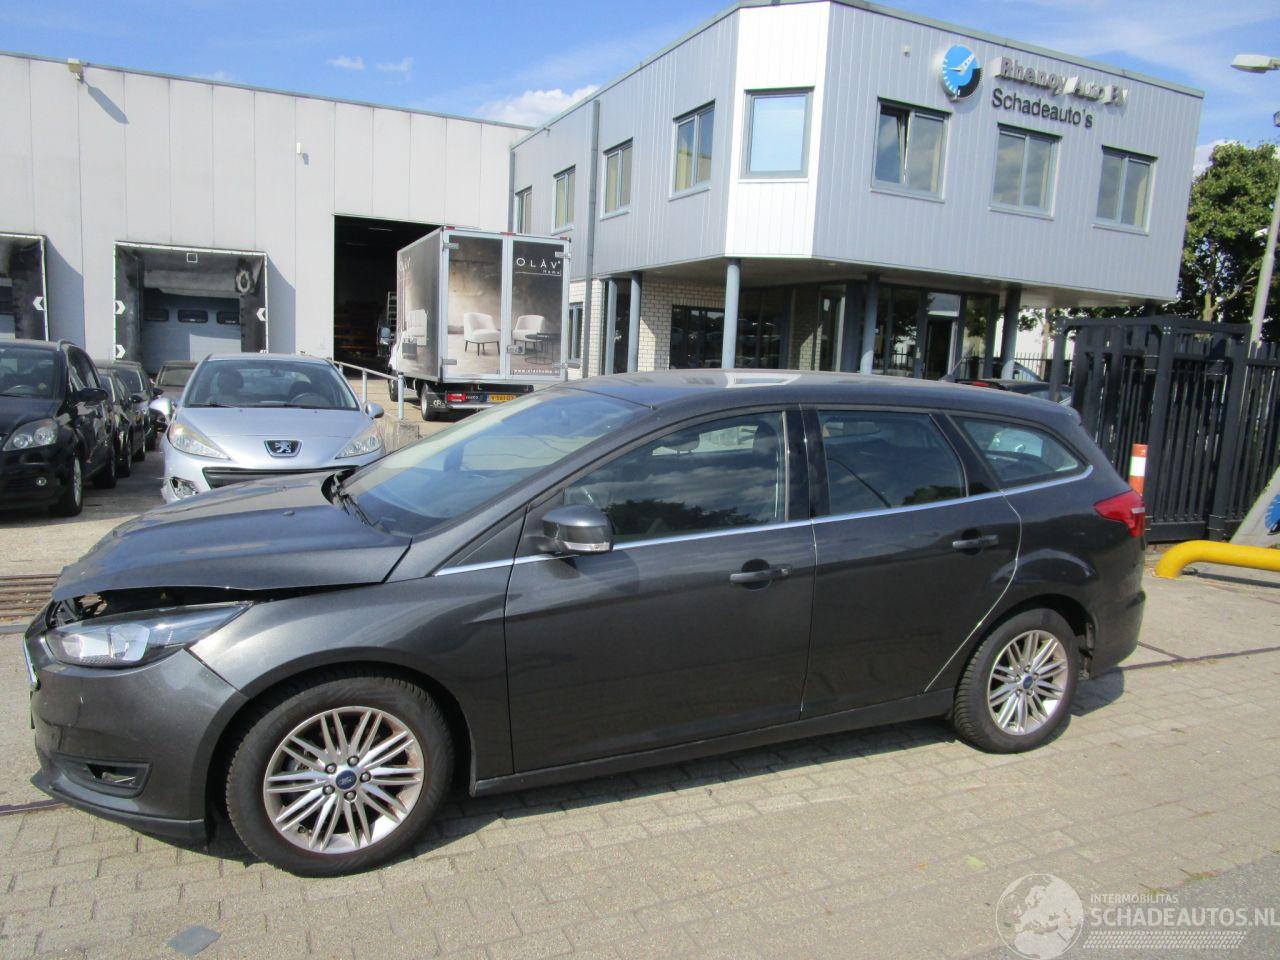 Ford Focus 1.0i 92kW 93000 km